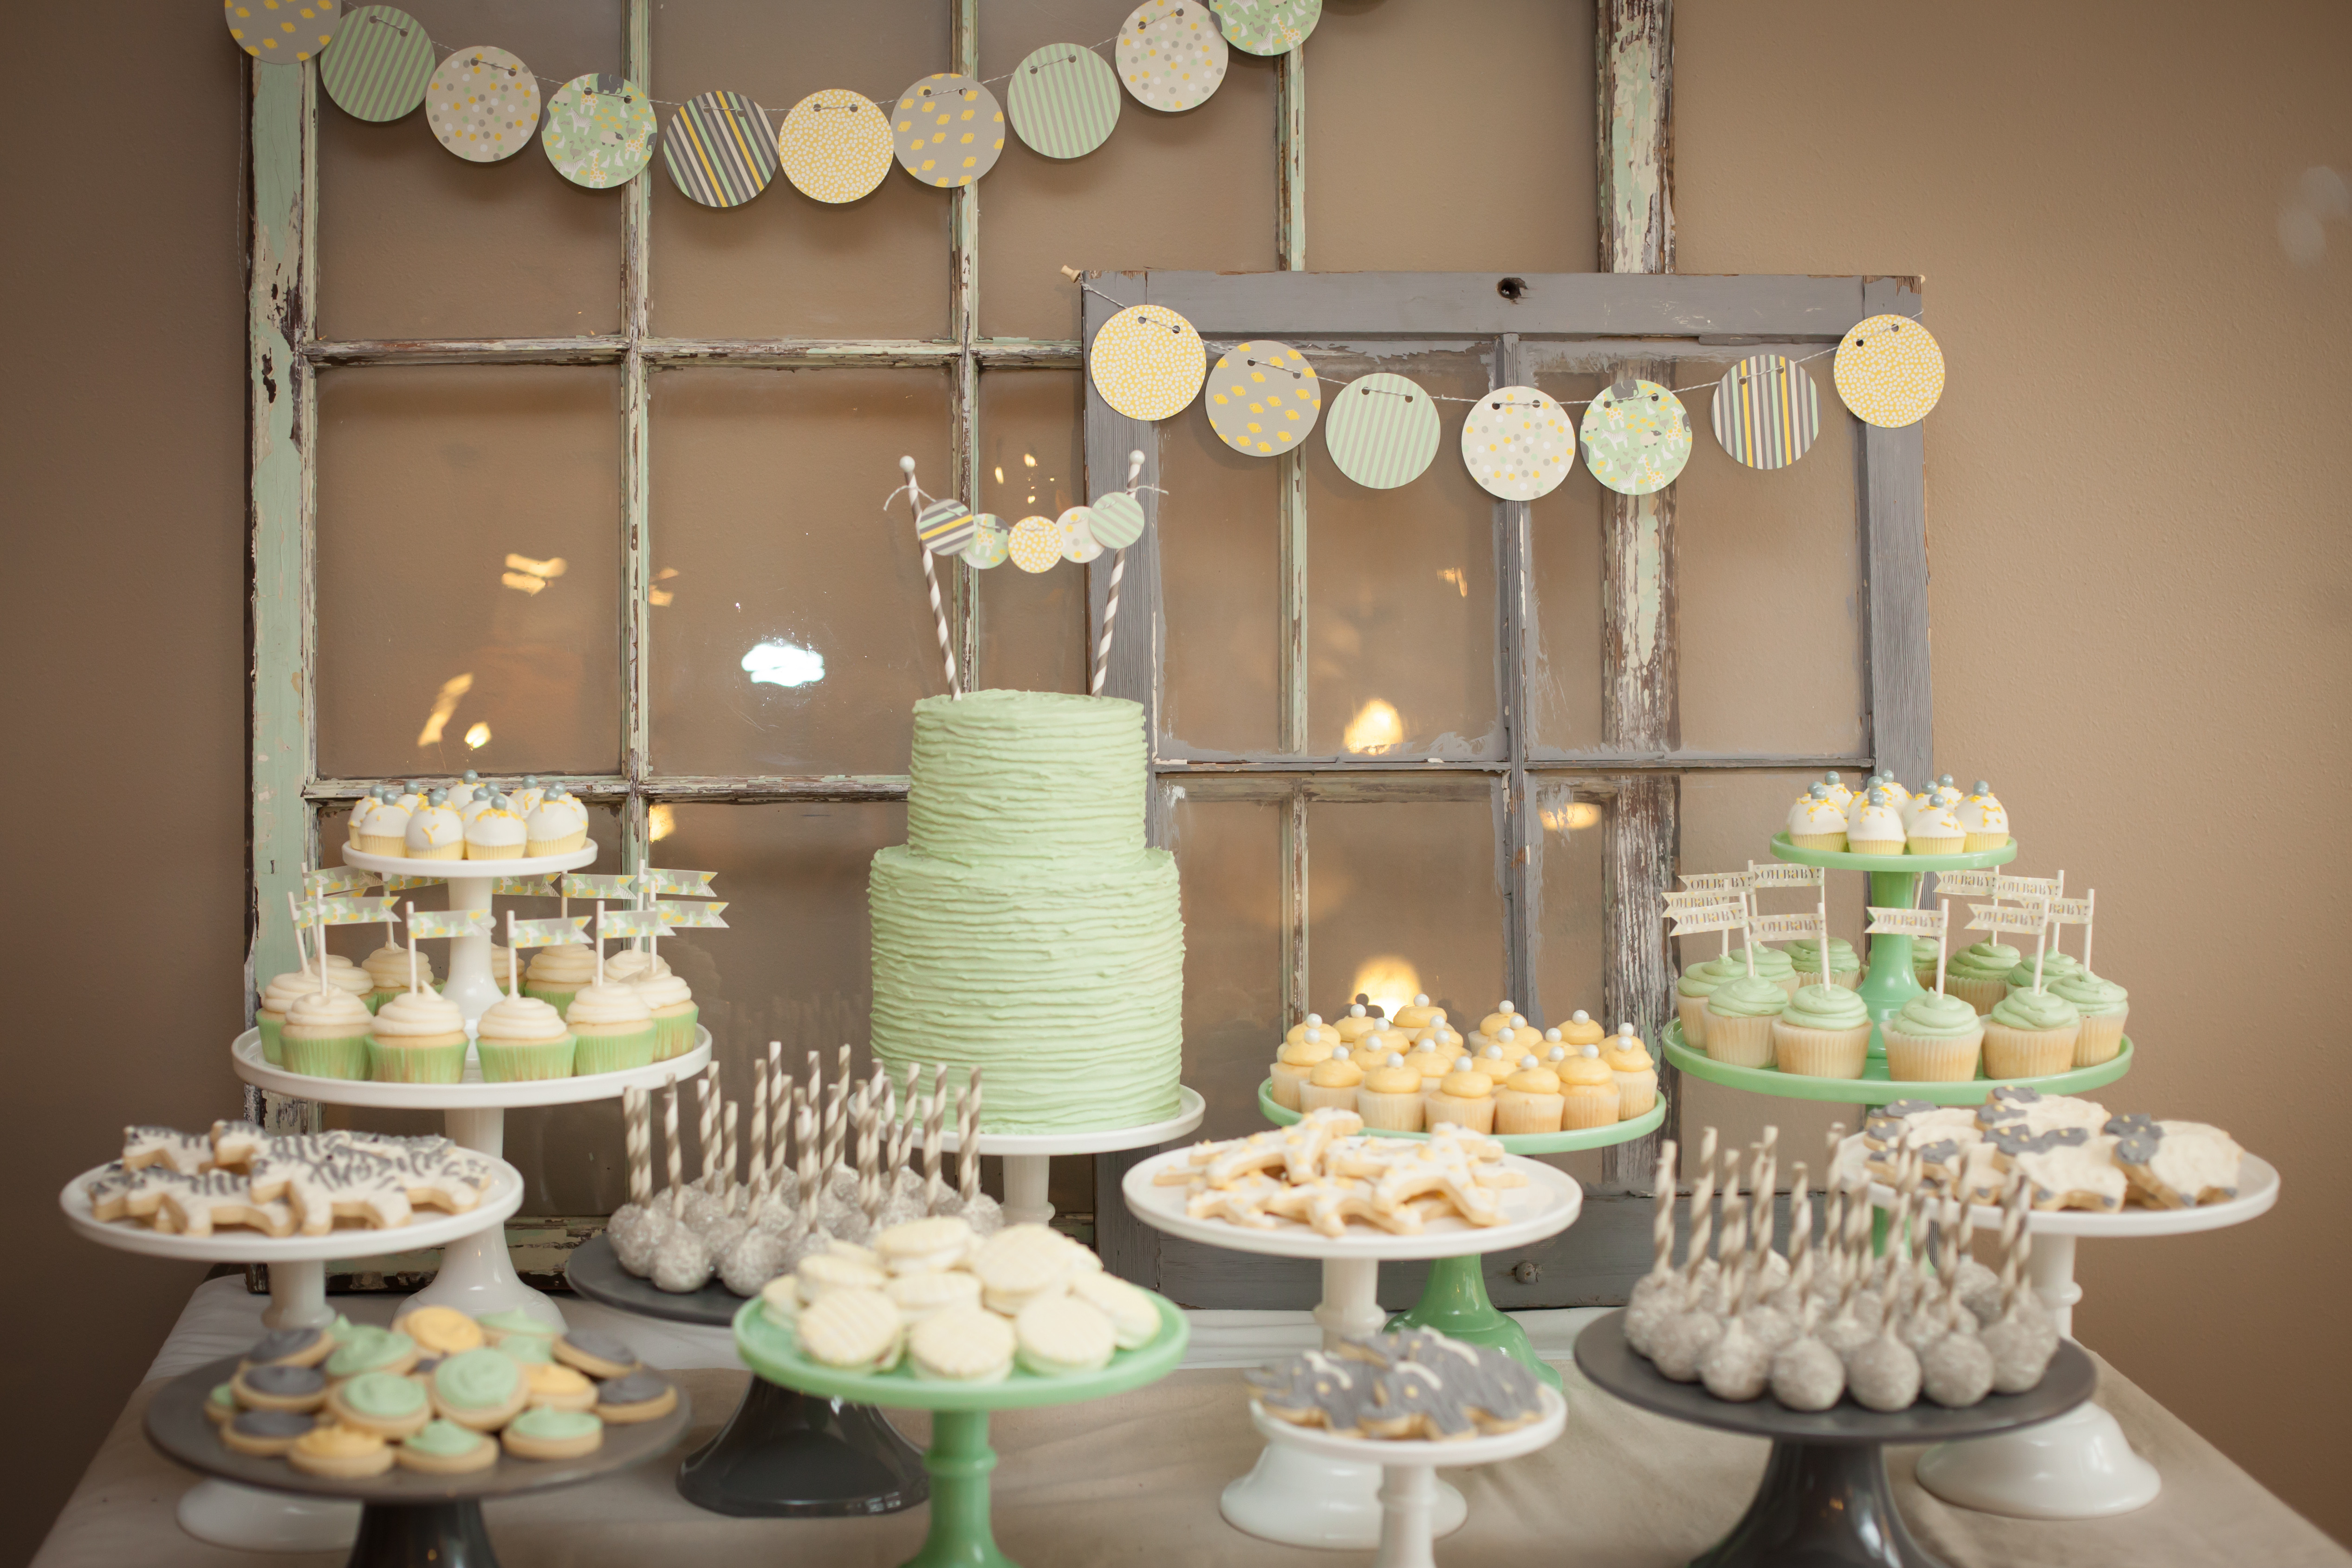 Baby Shower Dessert Table Ideas
 Bachelor Couple Jason and Molly Mesnick s Baby Shower